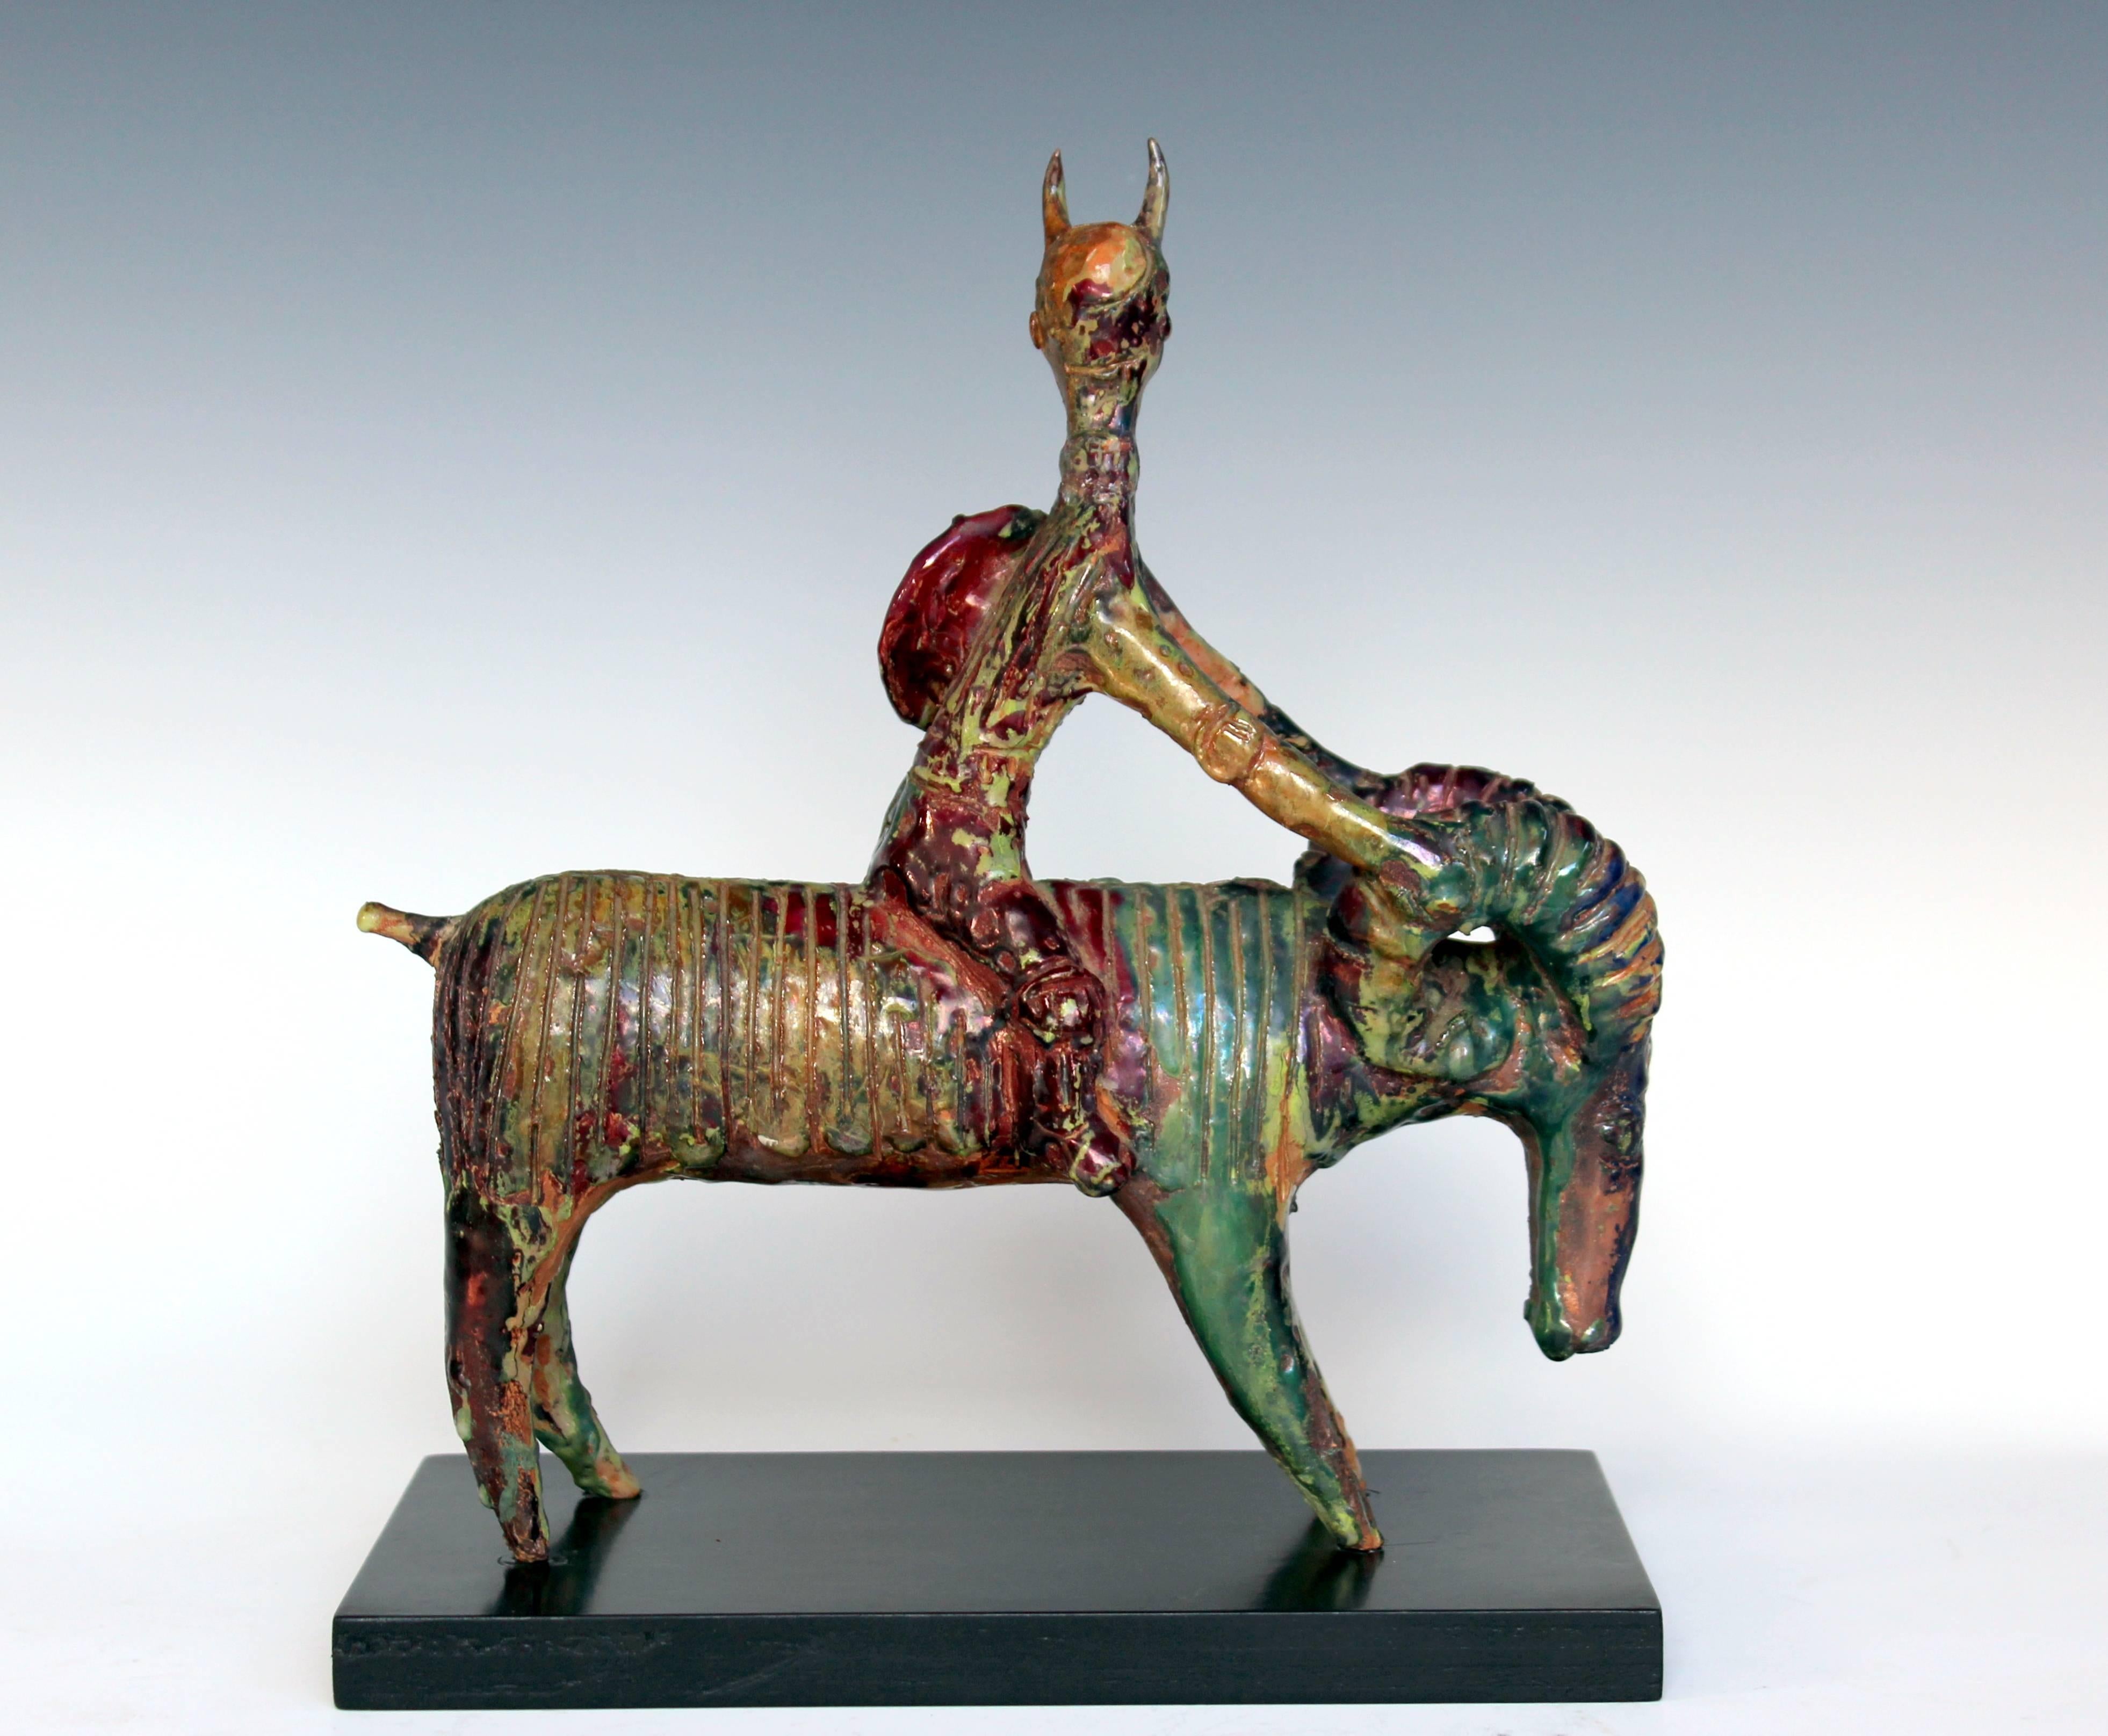 Extraordinary ceramic sculpture by renowned Italian artist, Gavino Tilocca. Circa 1960. Depicting a warrior figure with horns and shield riding a ram. 11 